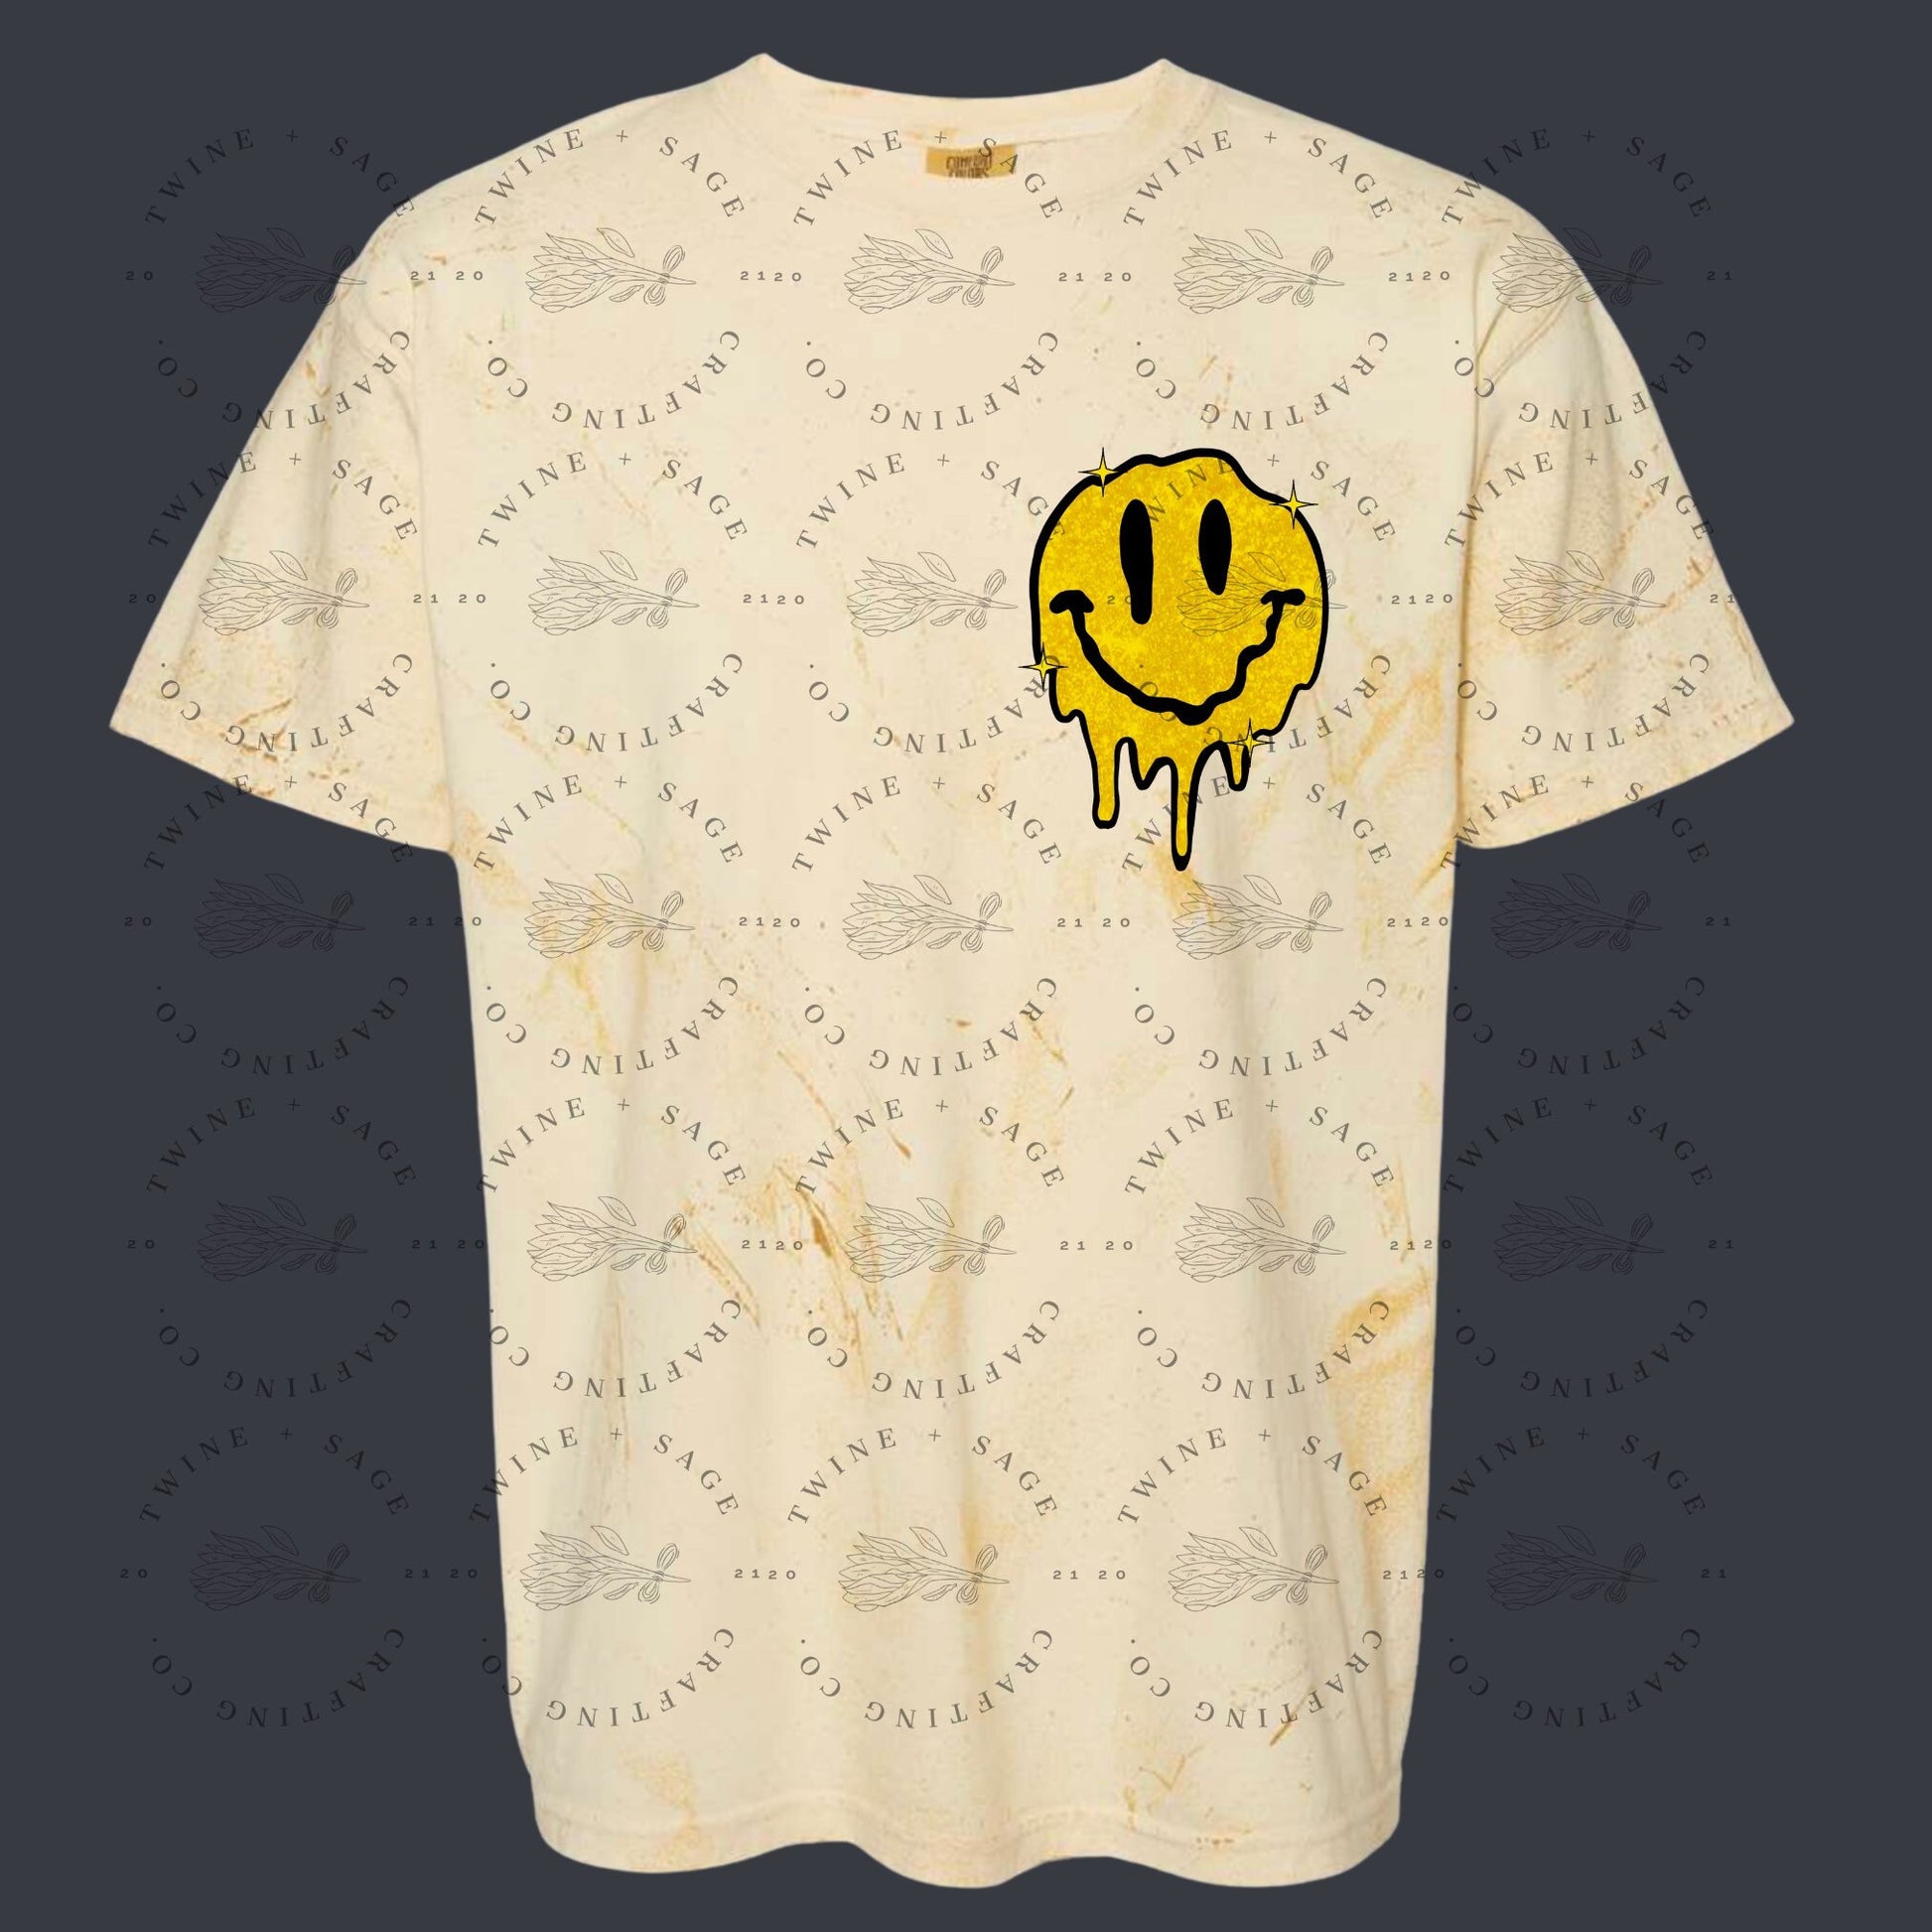 Sometimes It Be Like That Shirt, Melted Smiley Face Shirt, Smiley Face Shirt, Graphic Tee Shirt, Comfort Colors, Sad Shirt, Faux Pocket Tee